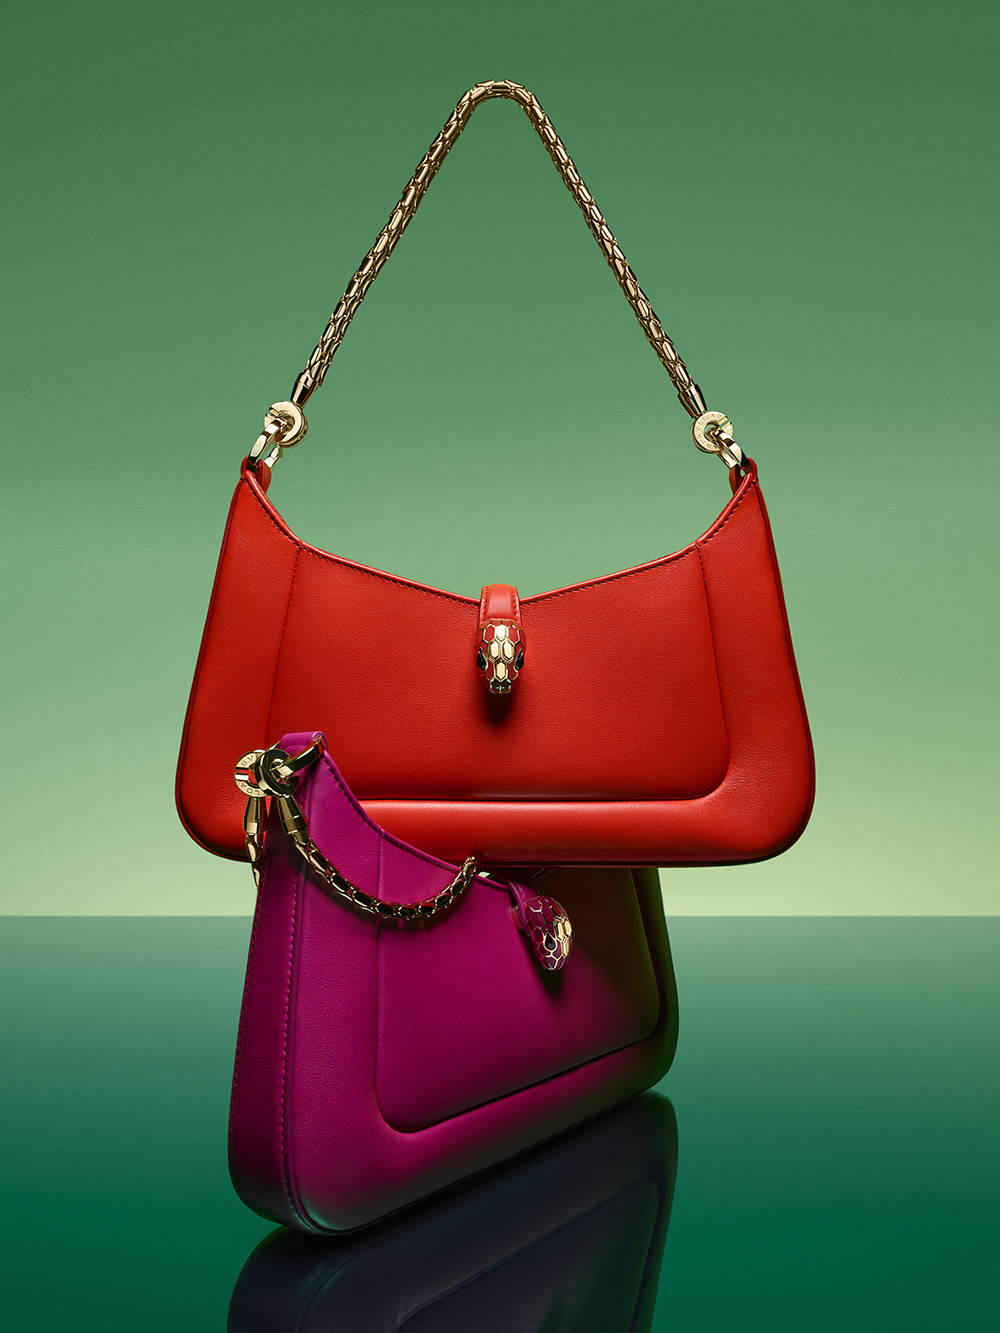 Bvlgari Serpenti Forever collection of bags